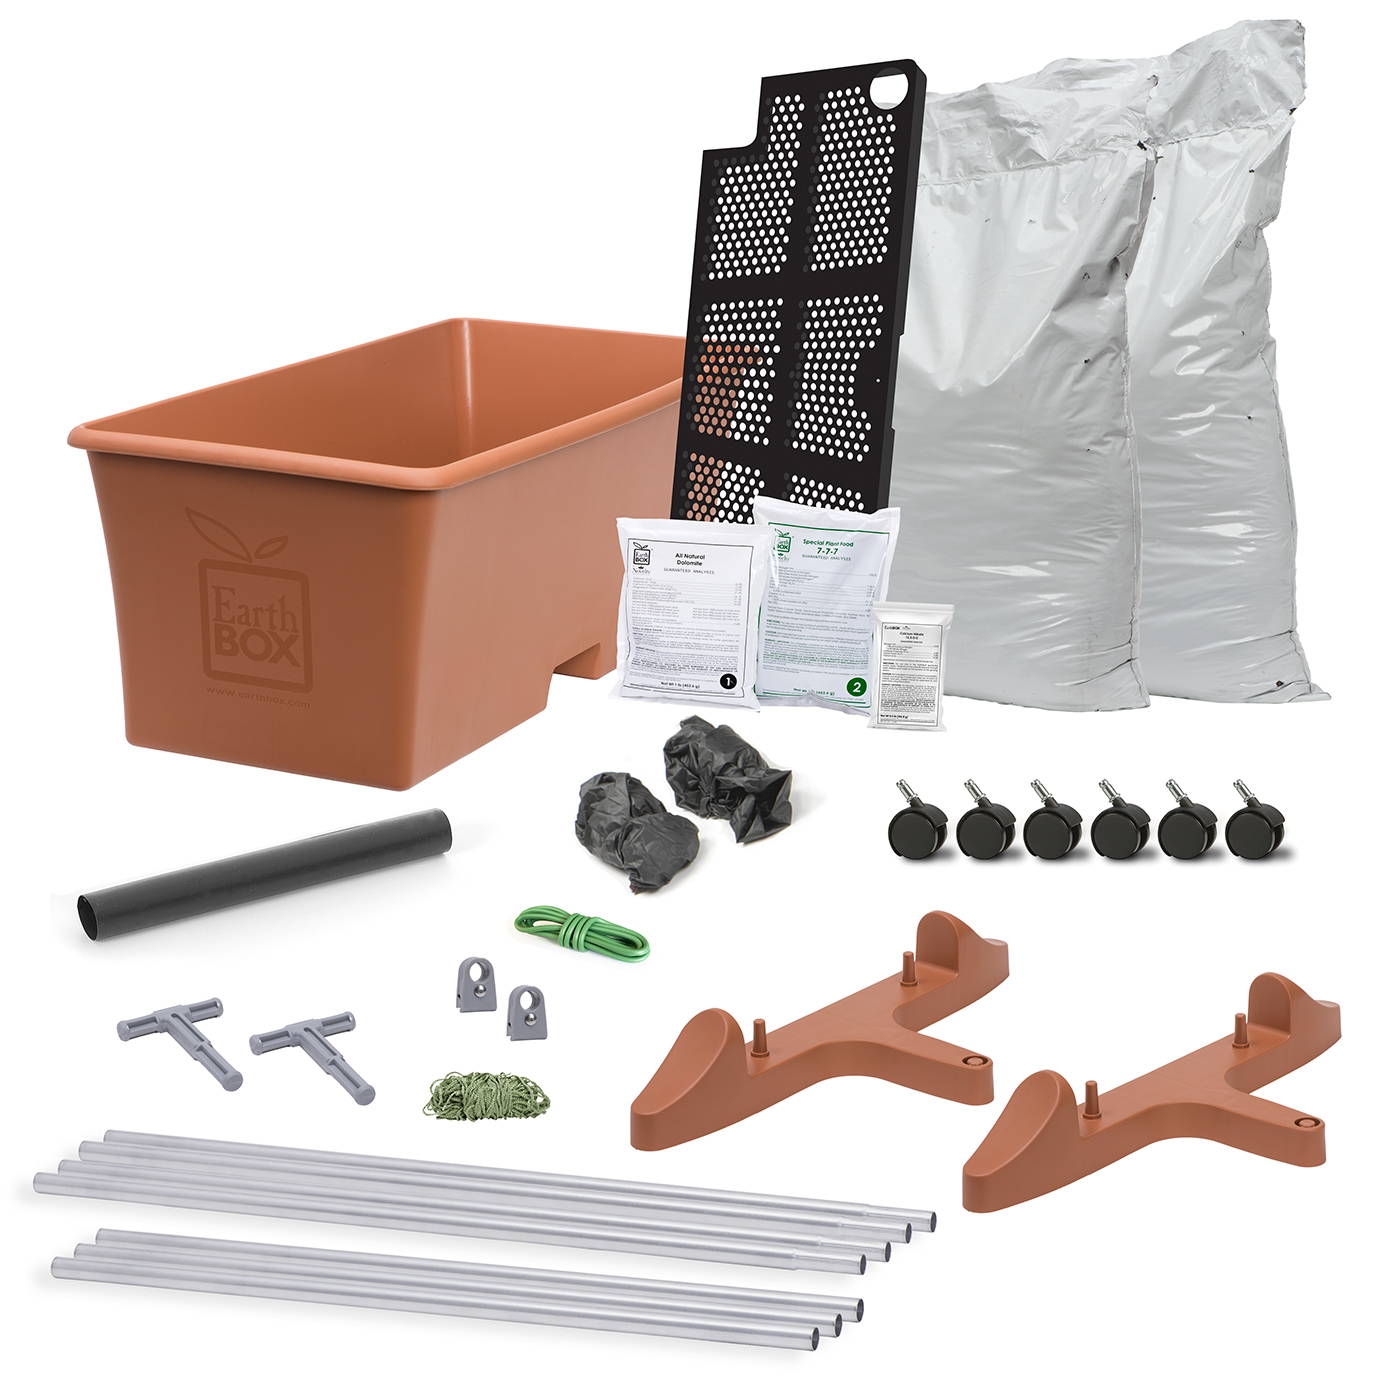 Terracotta EarthBox Ready-To-Grow Tomato growing bundle items